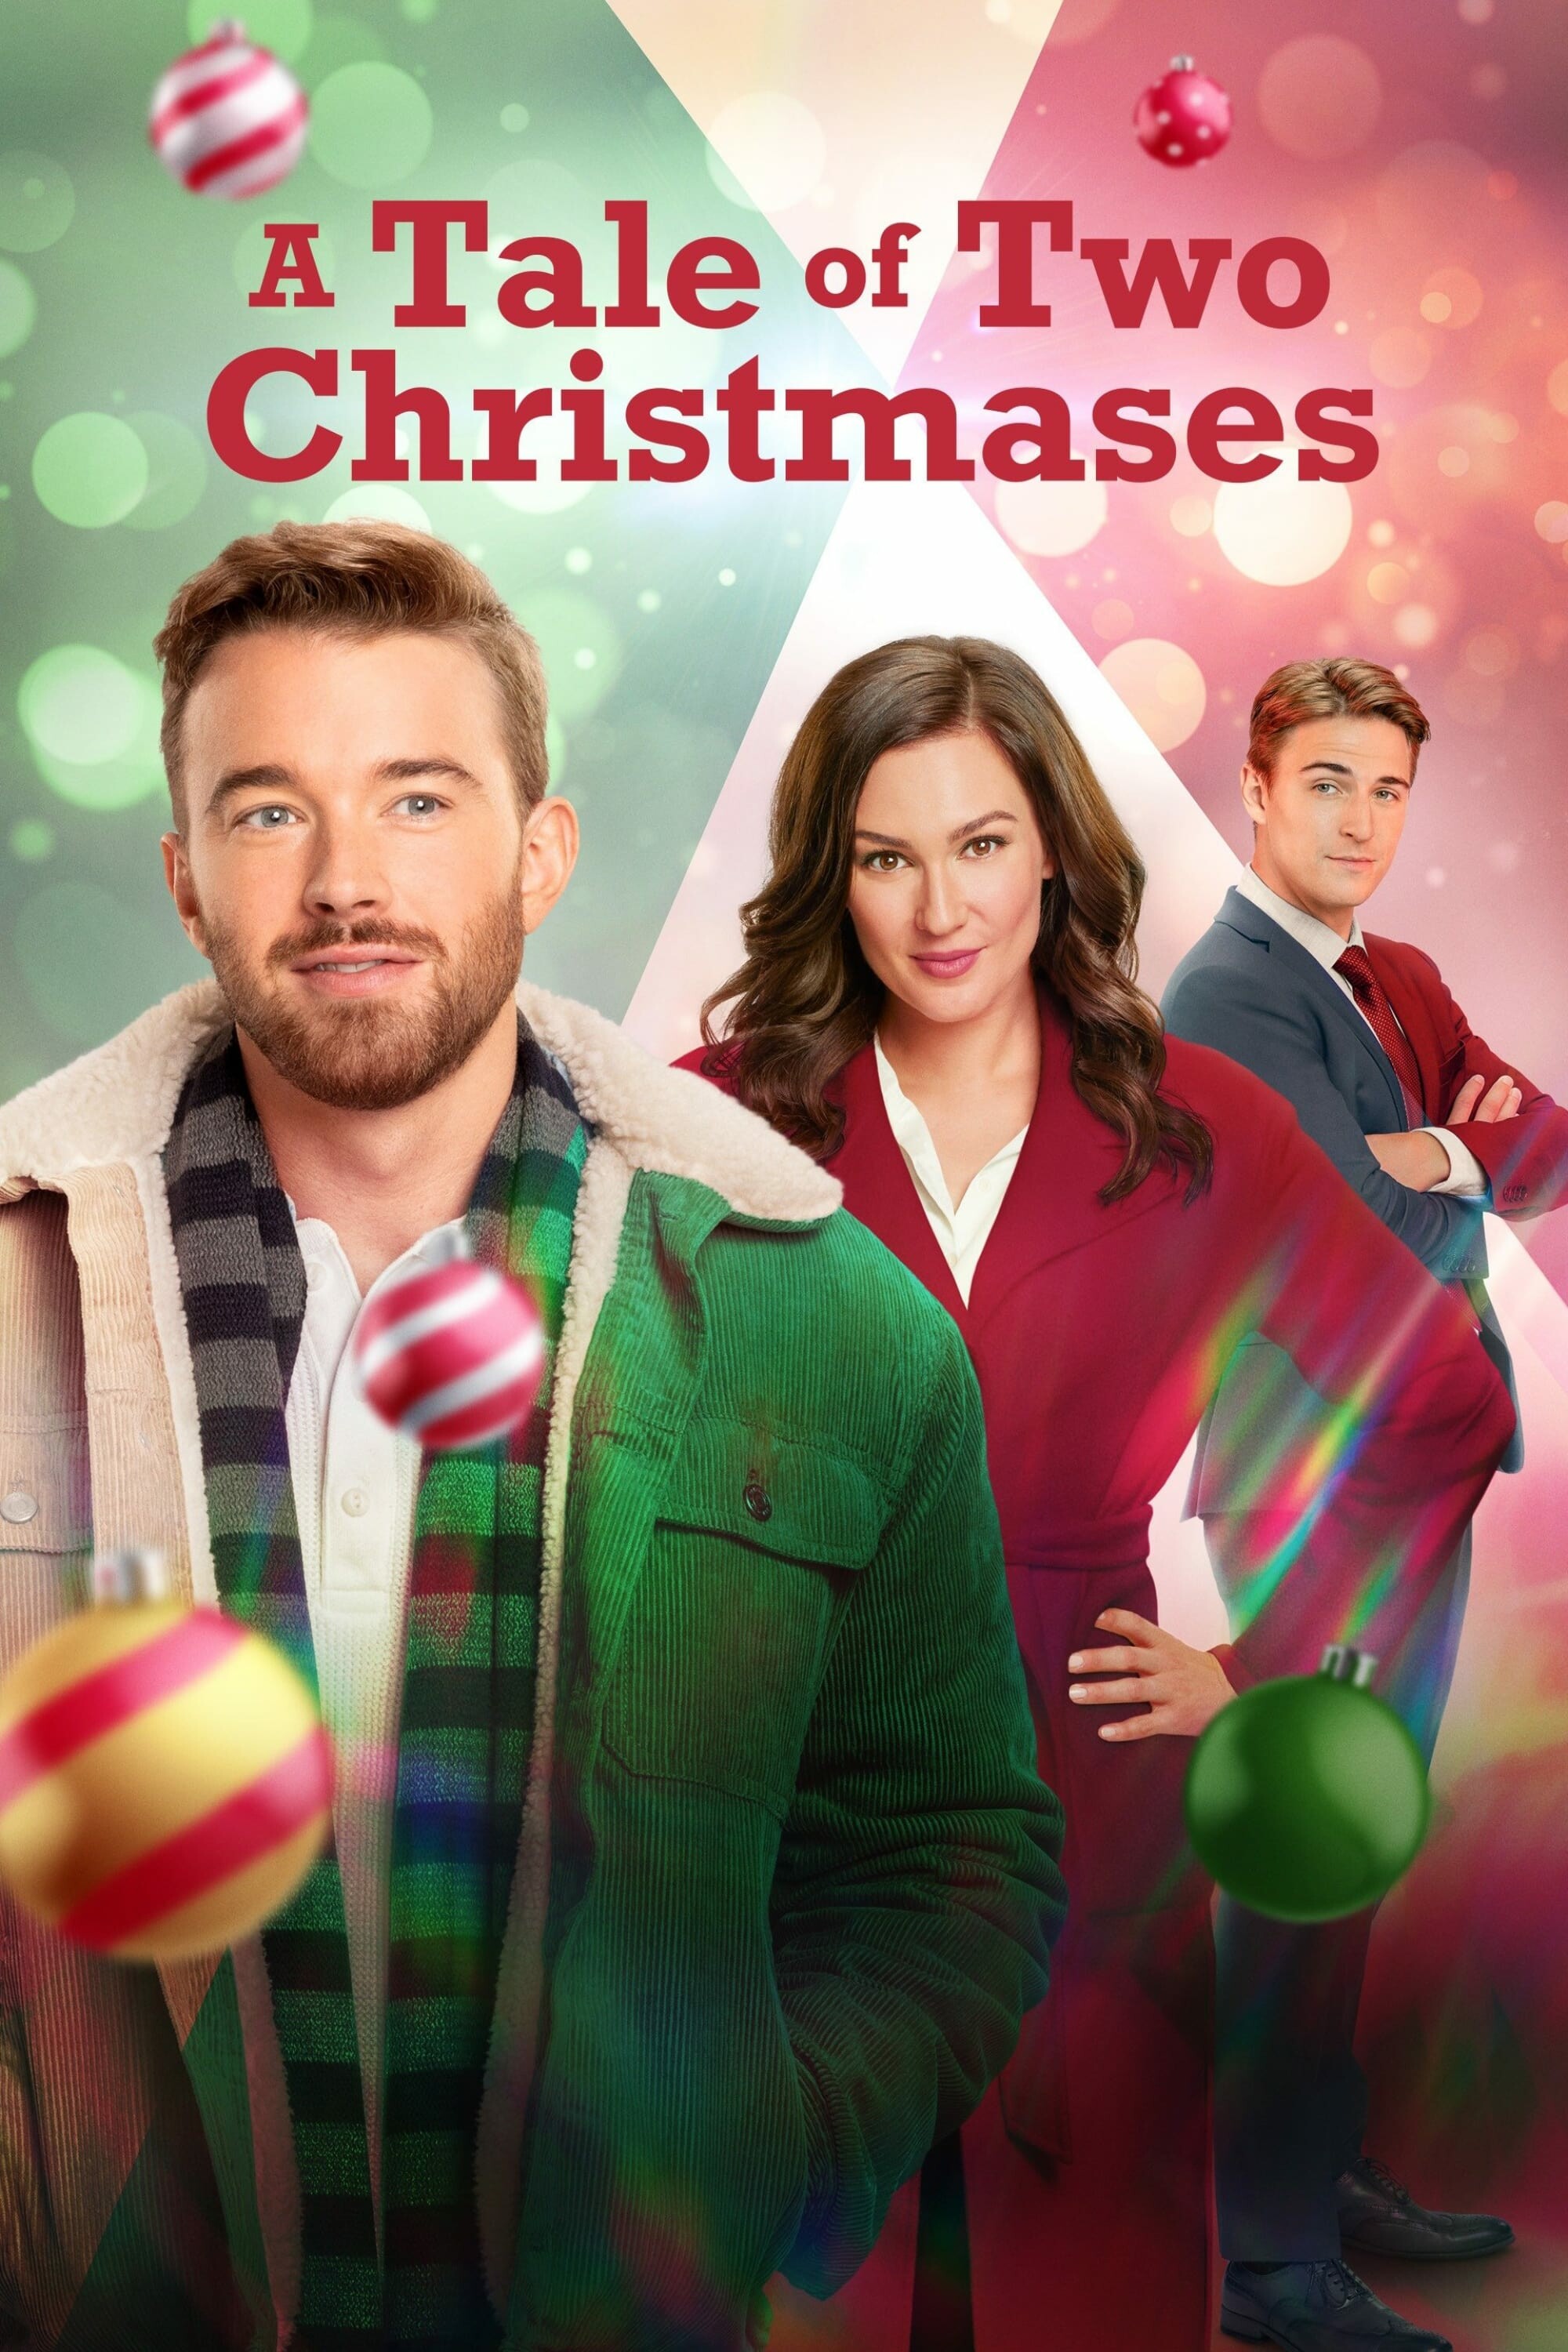 A tale of two christmases 2022 1080p webrip hevc x265